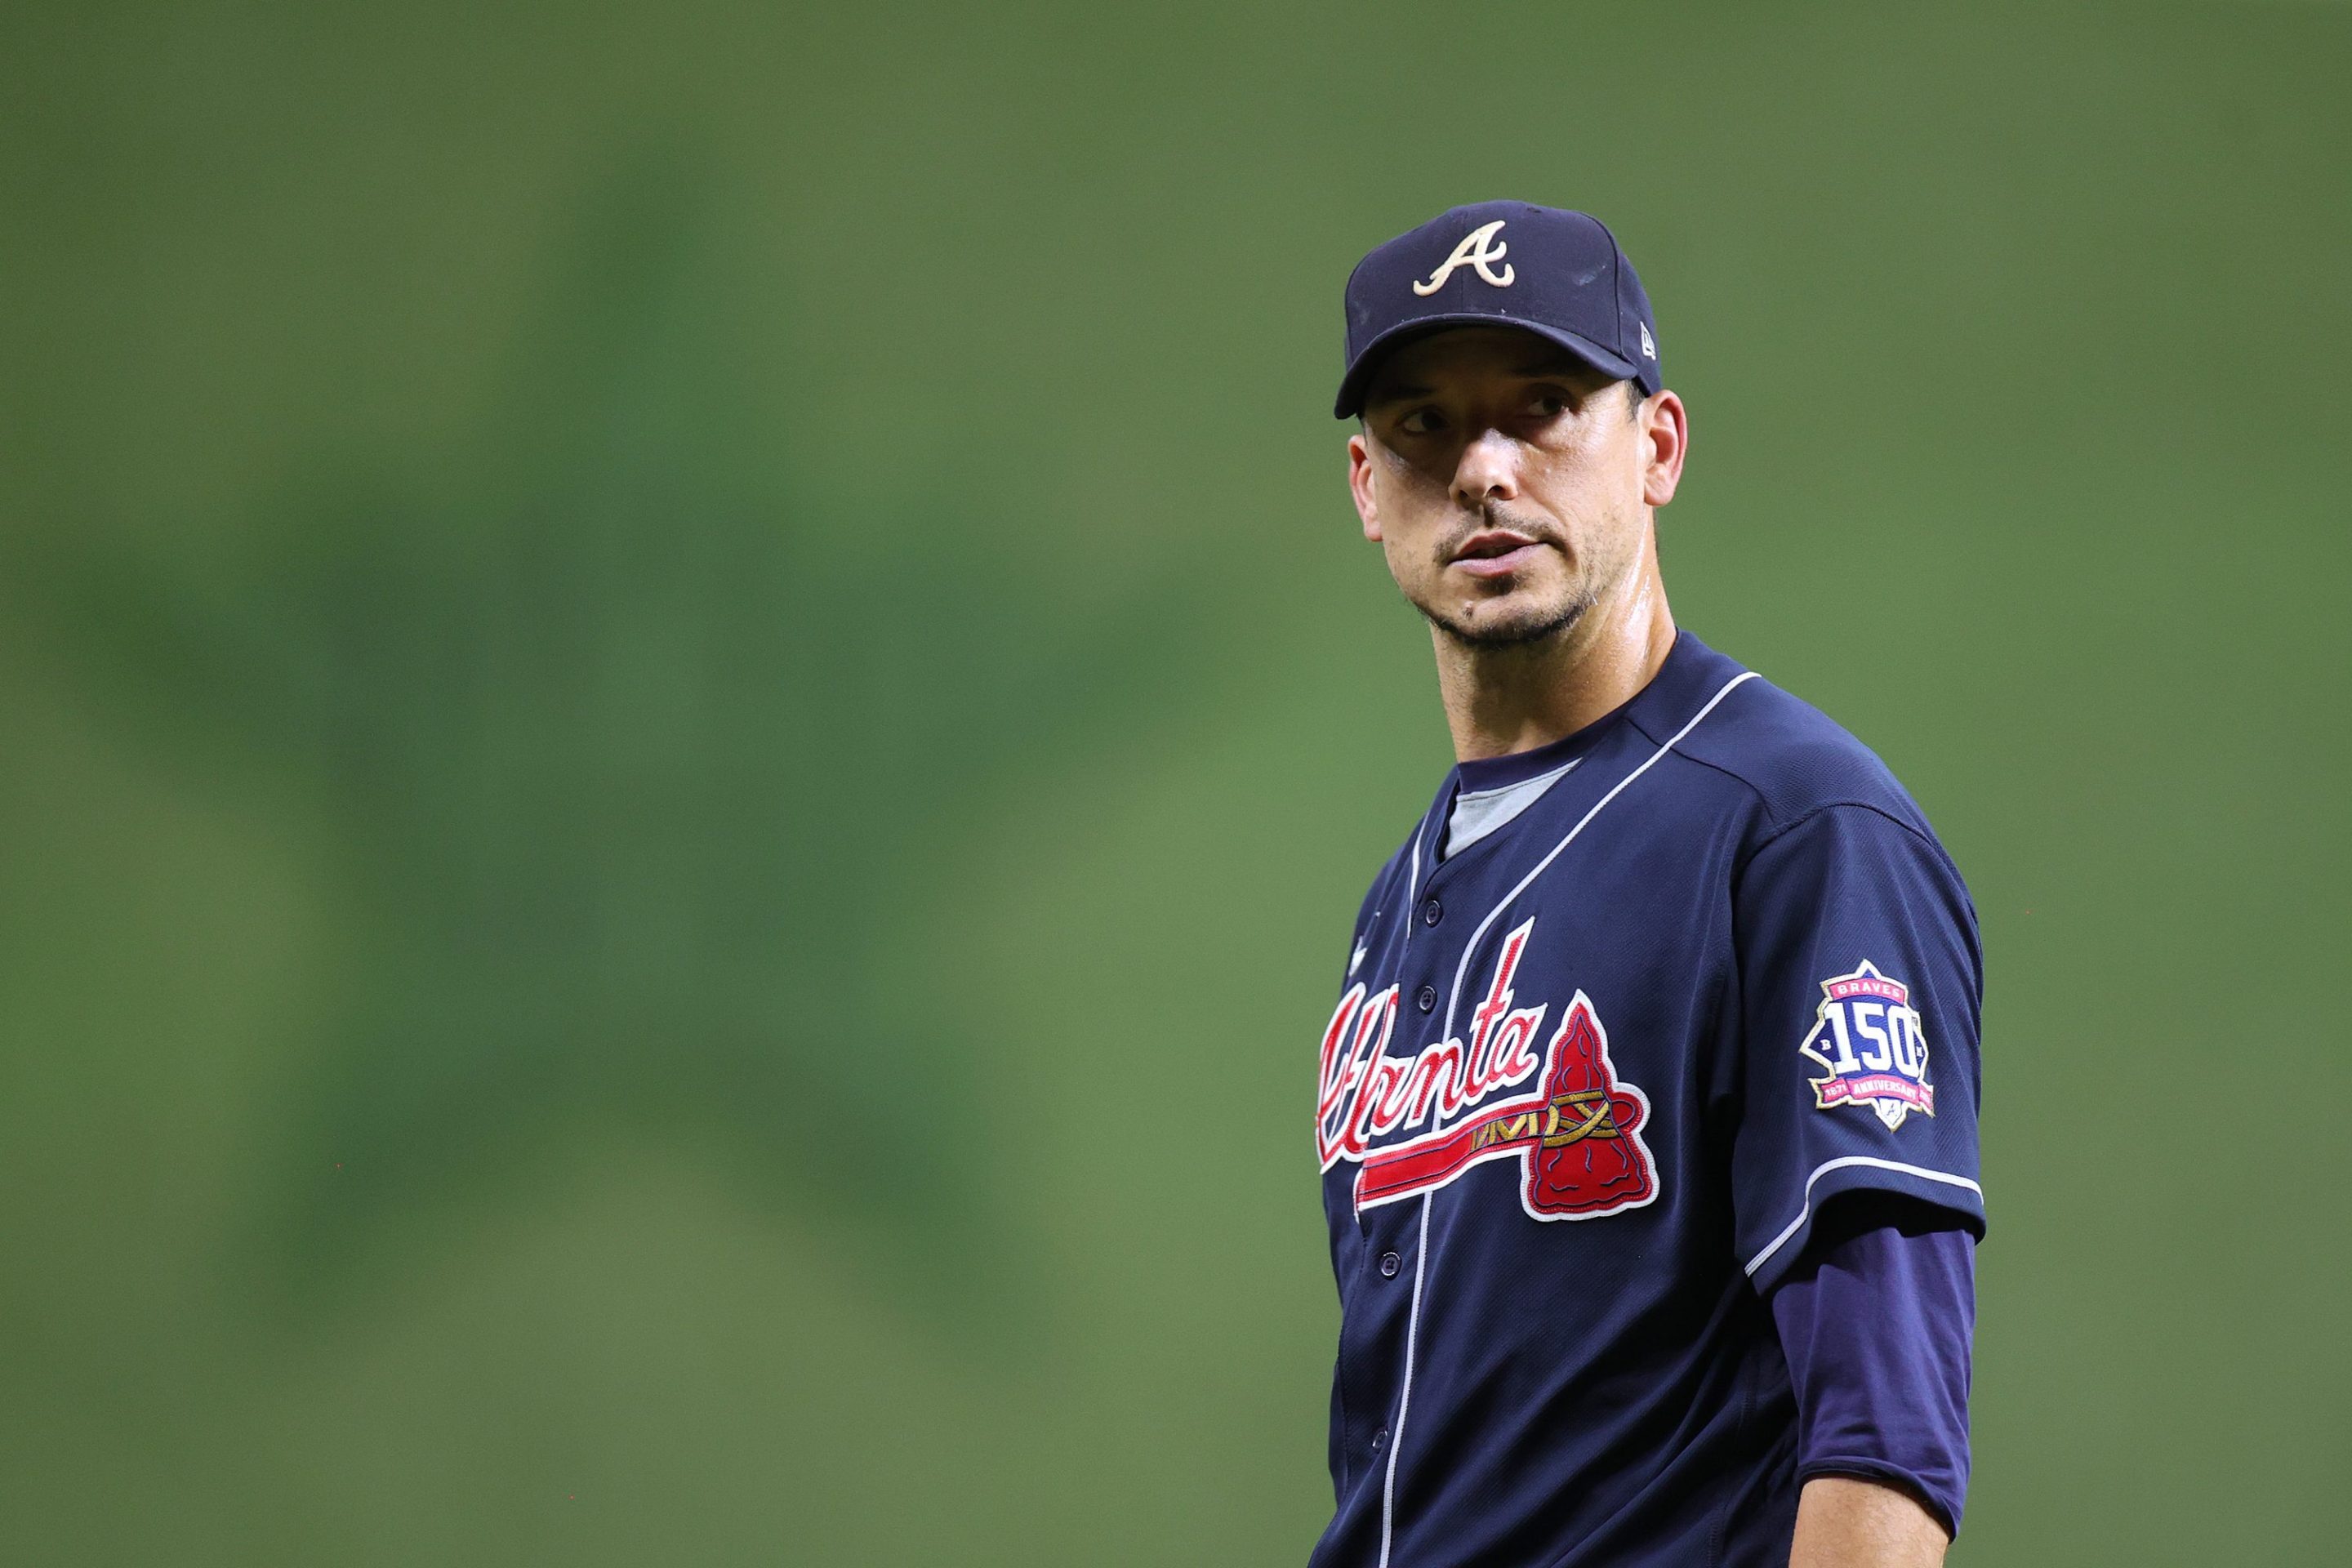 Charlie Morton #50 of the Atlanta Braves looks on against the Houston Astros during the second inning in Game One of the World Series at Minute Maid Park on October 26, 2021 in Houston, Texas.